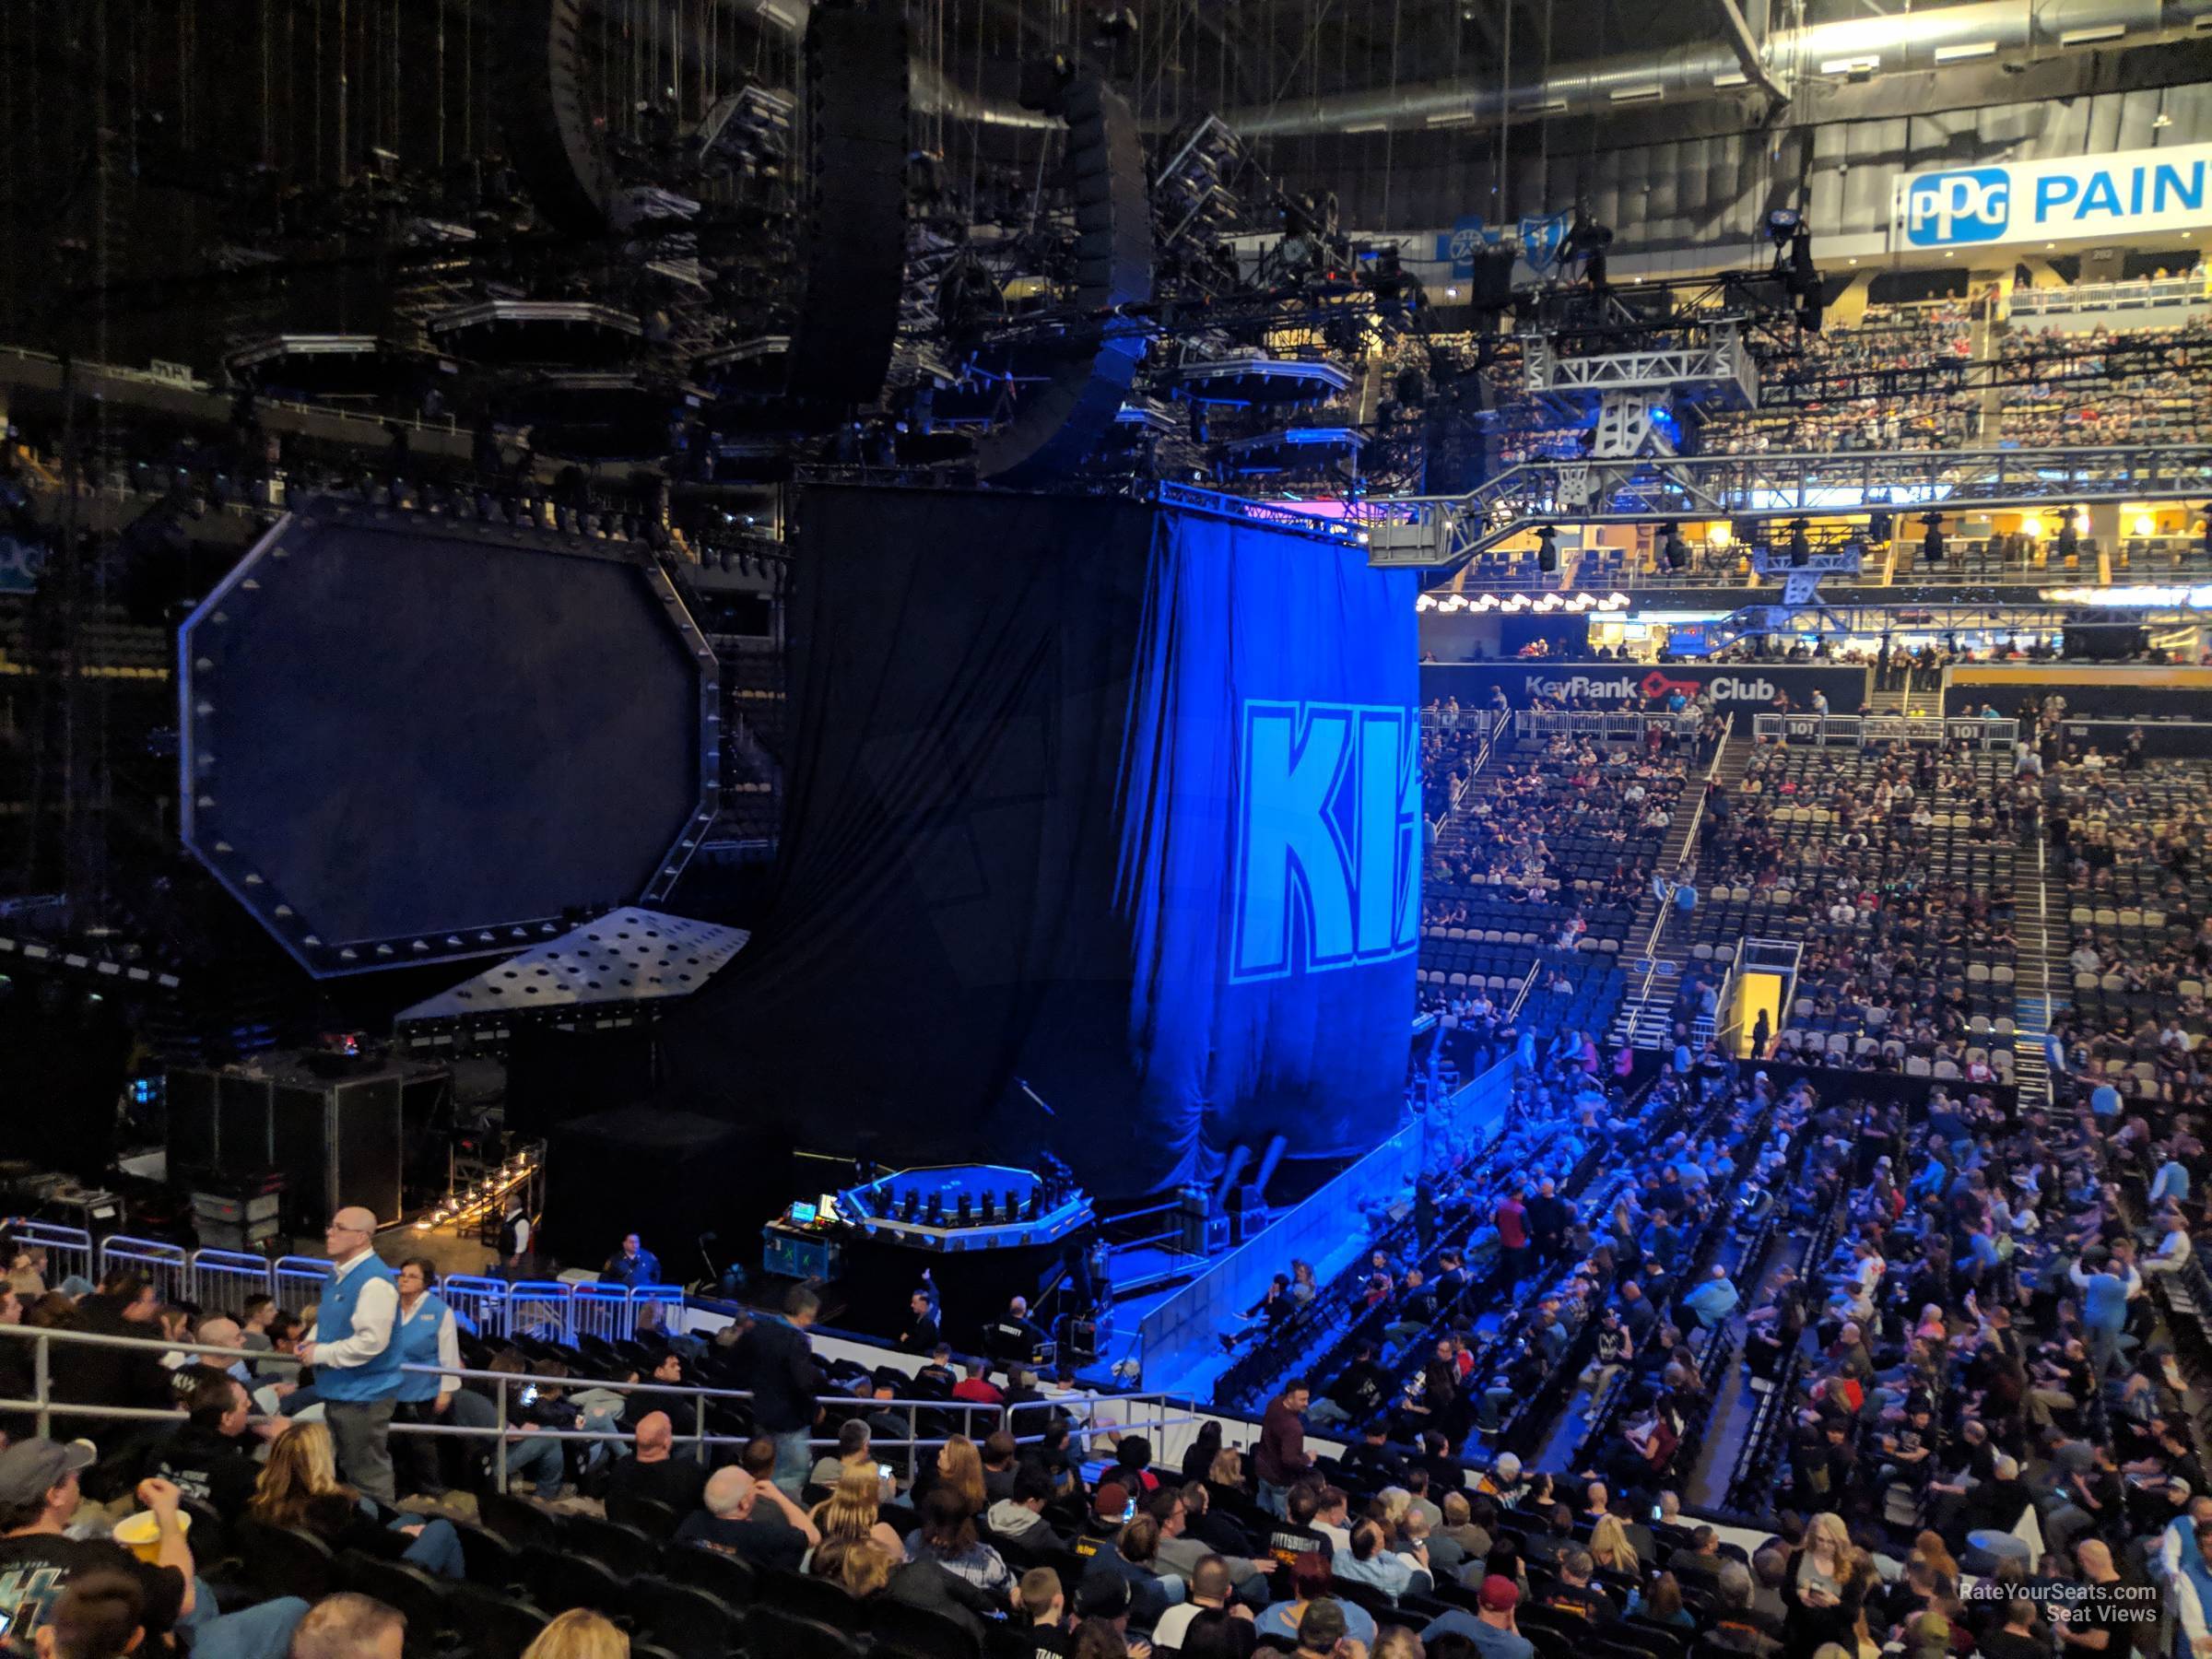 Section 113 at PPG Paints Arena for Concerts